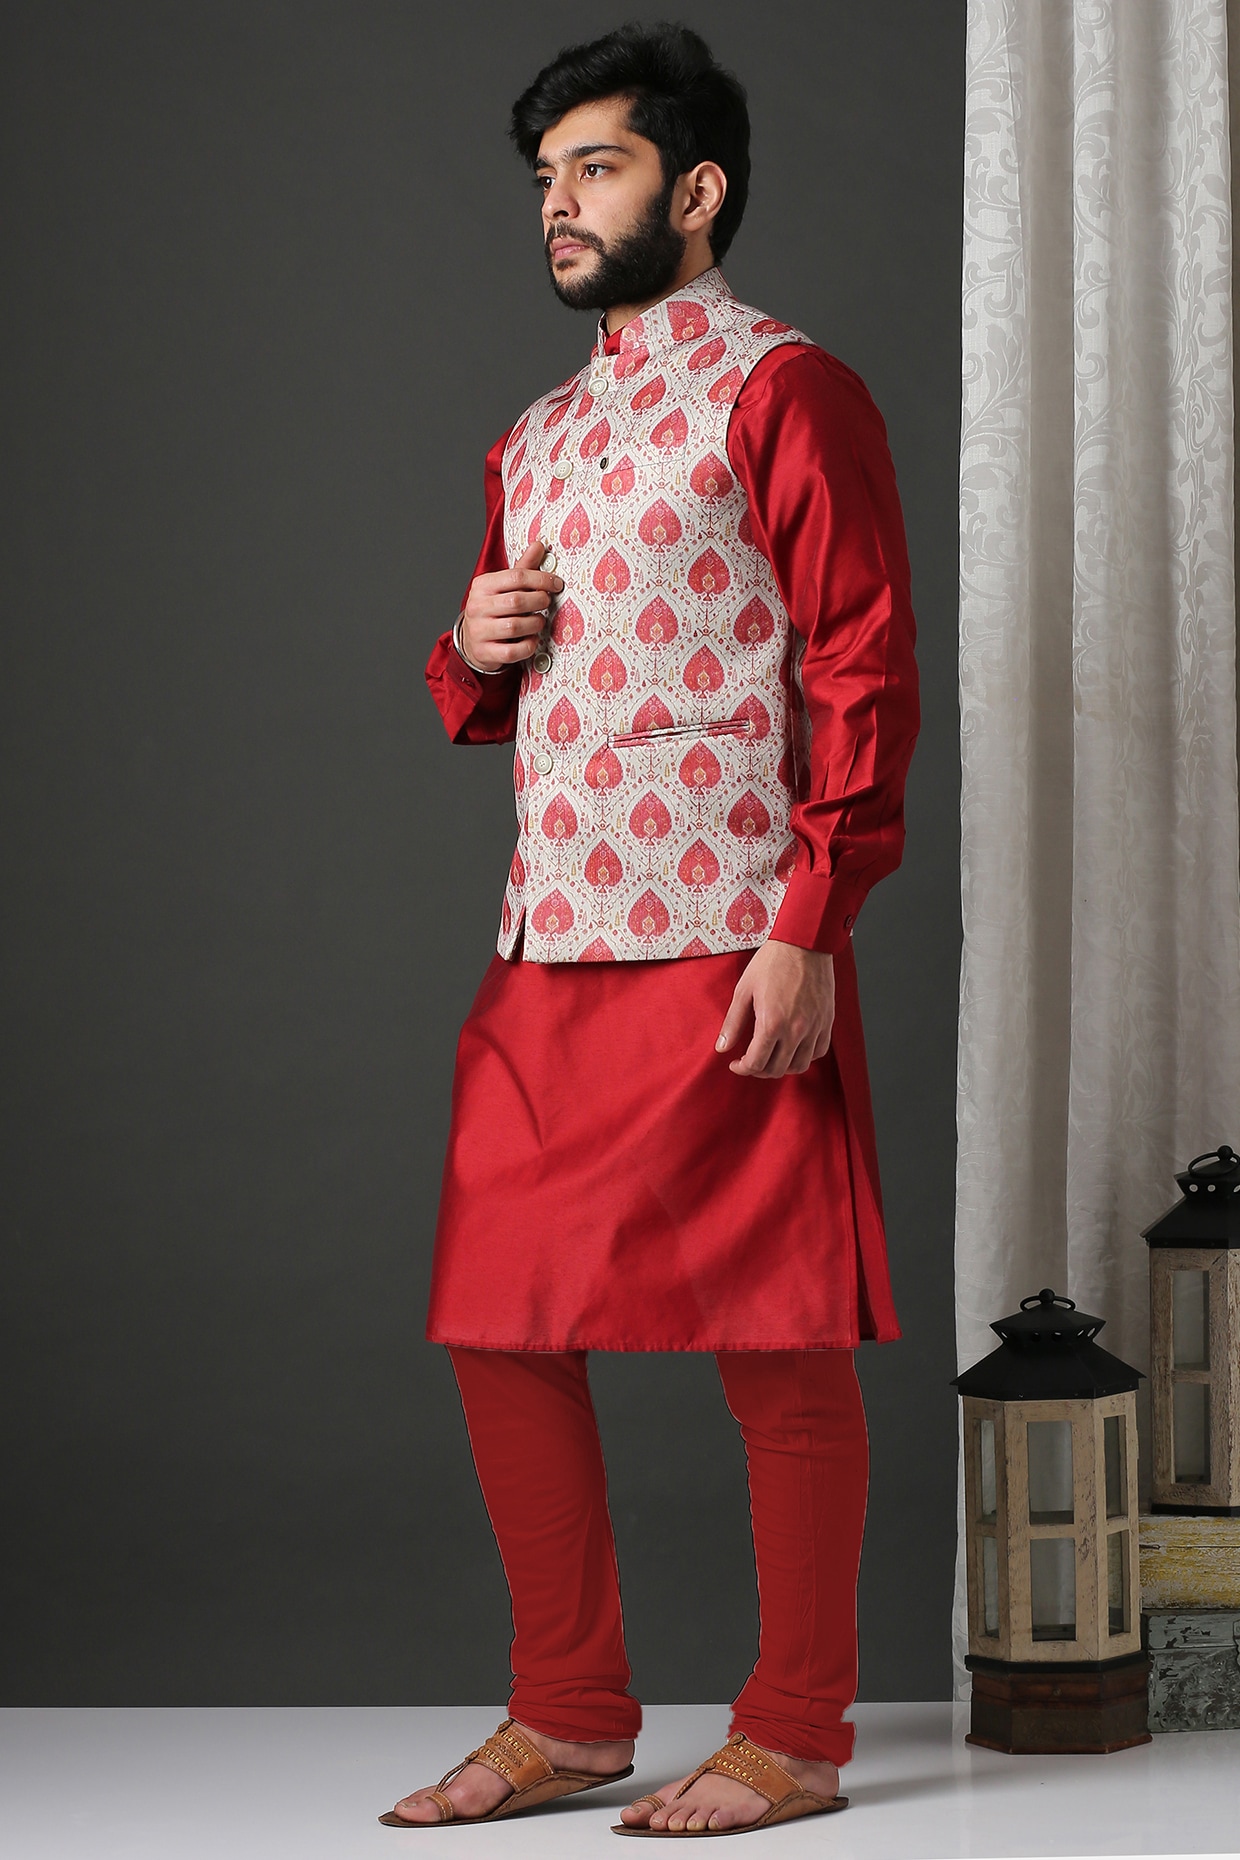 A Trending Design For A Luxury Mirror Work A Maroon Kurta, White pajama,  And A White Nehru jacket - Faisal Outfits ! Best Man's Clothing